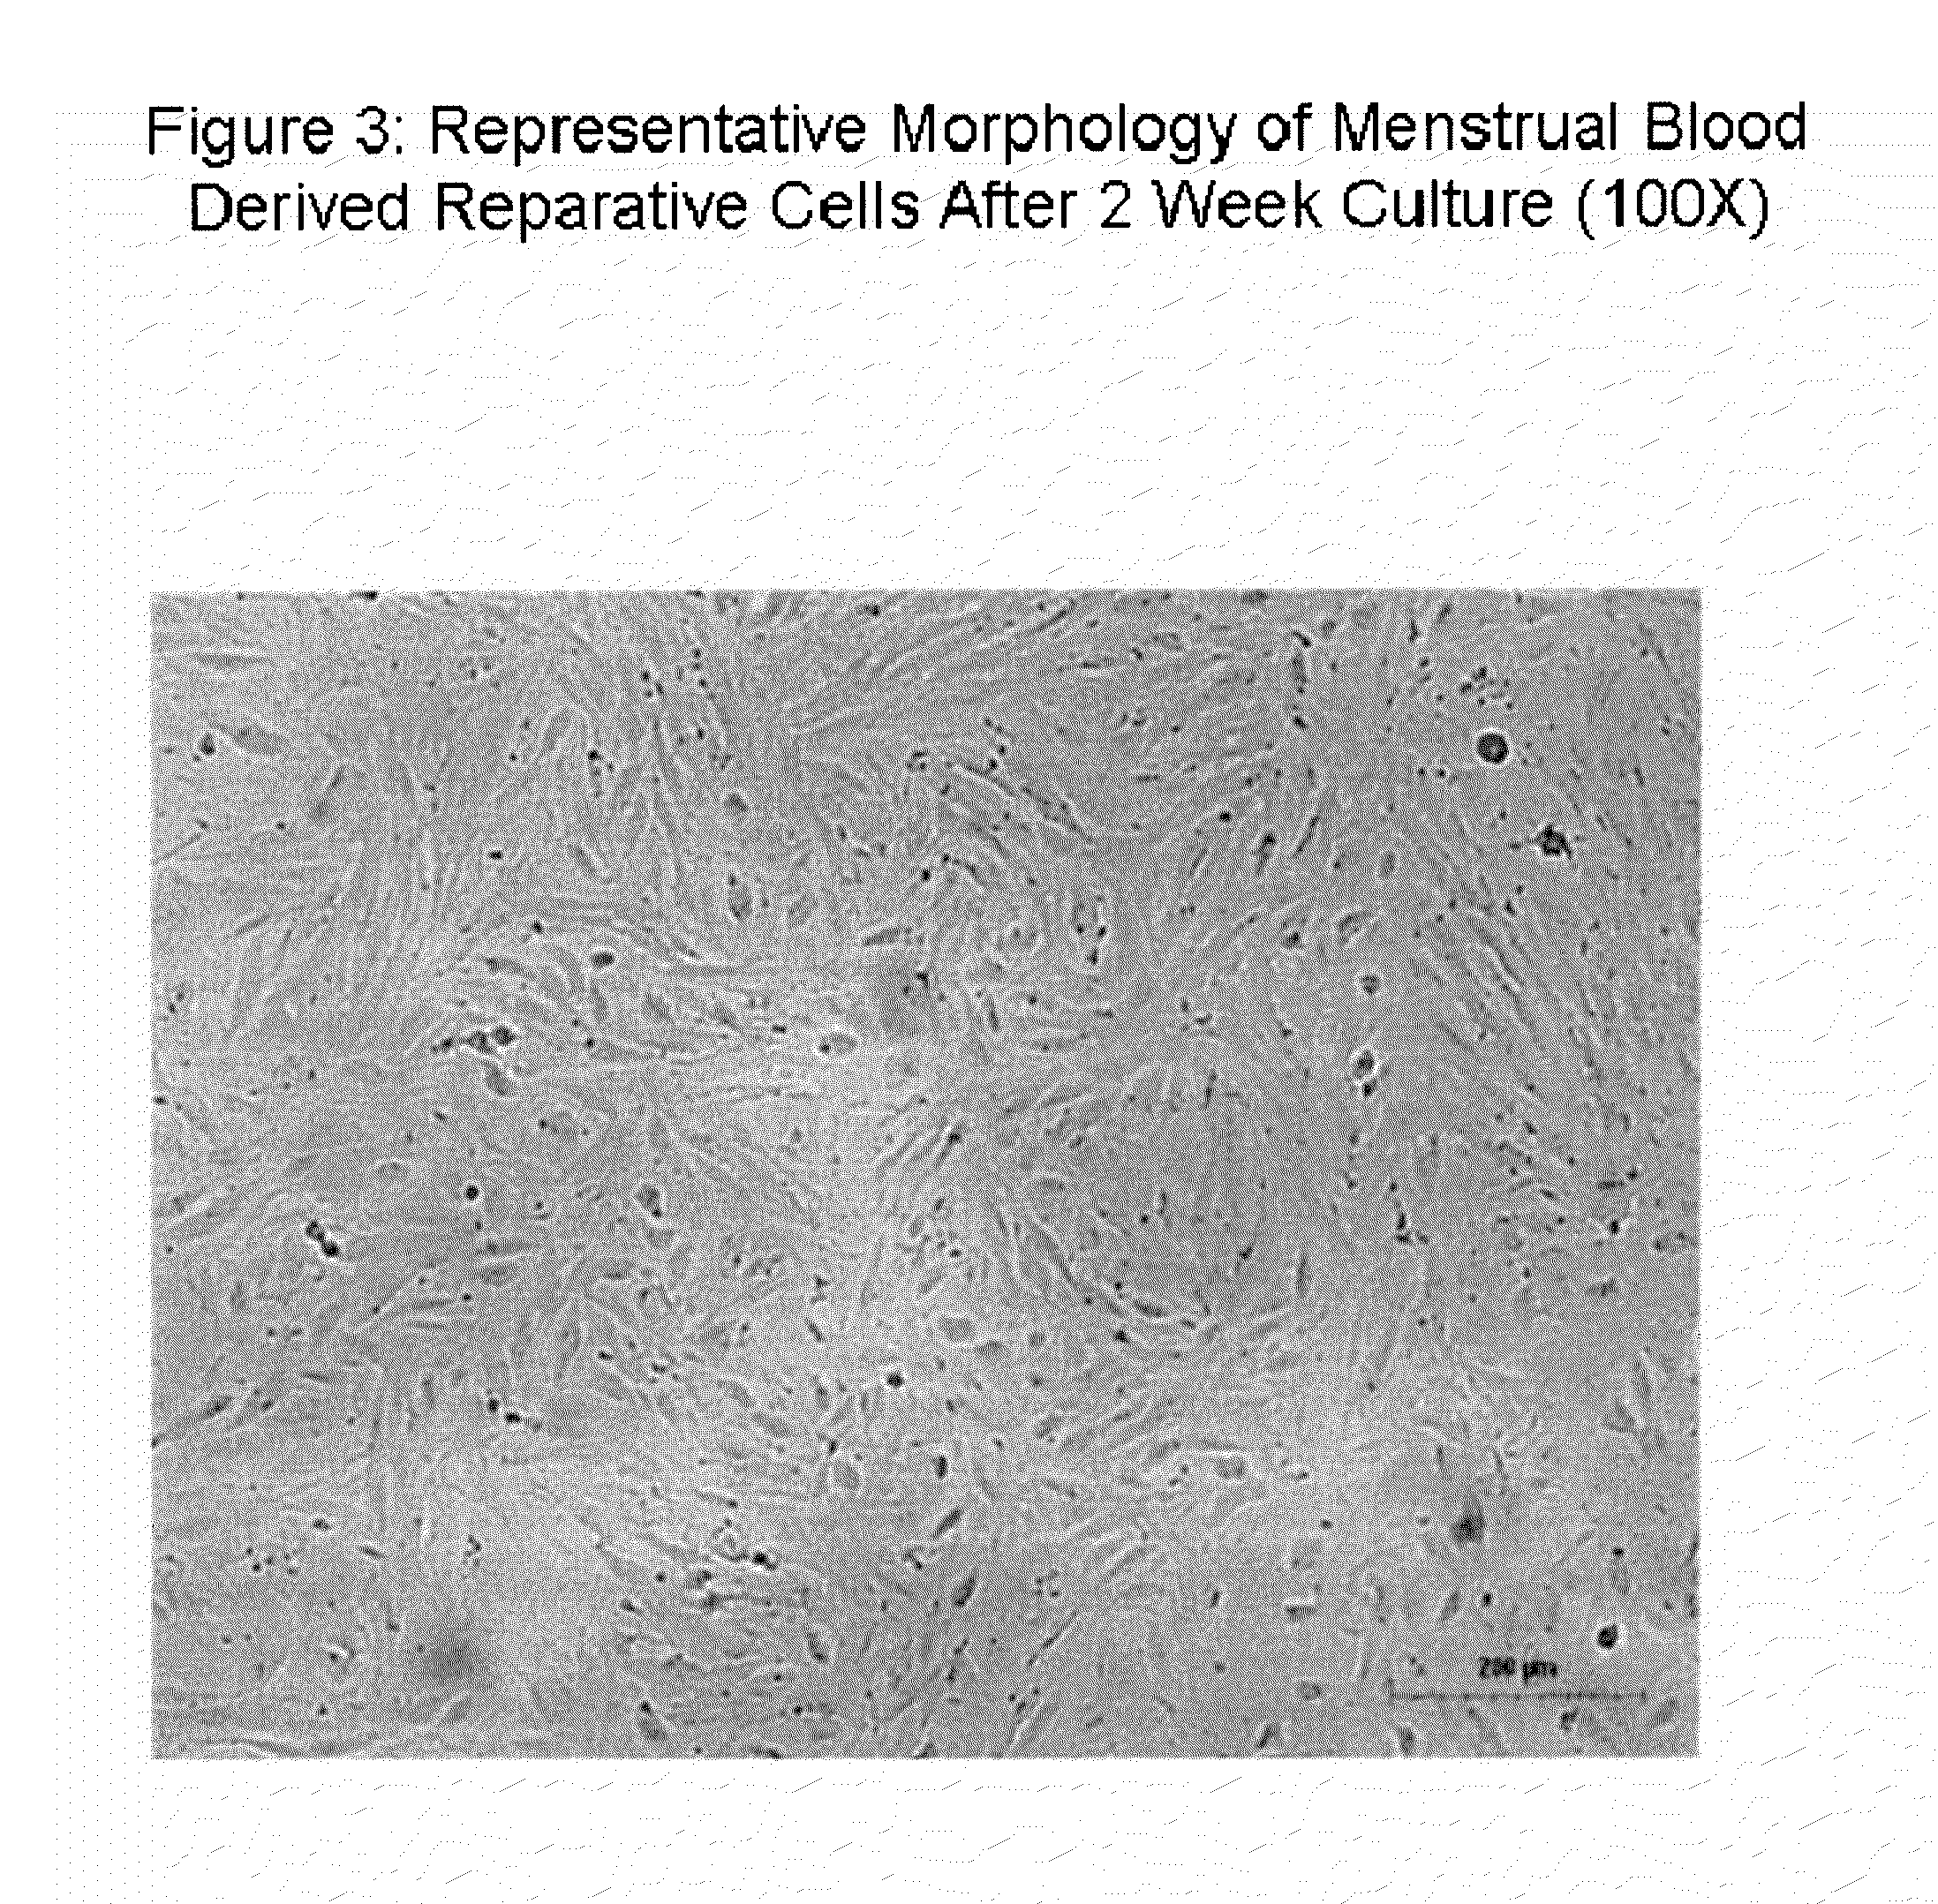 Endometrial stem cells and methods of making and using same